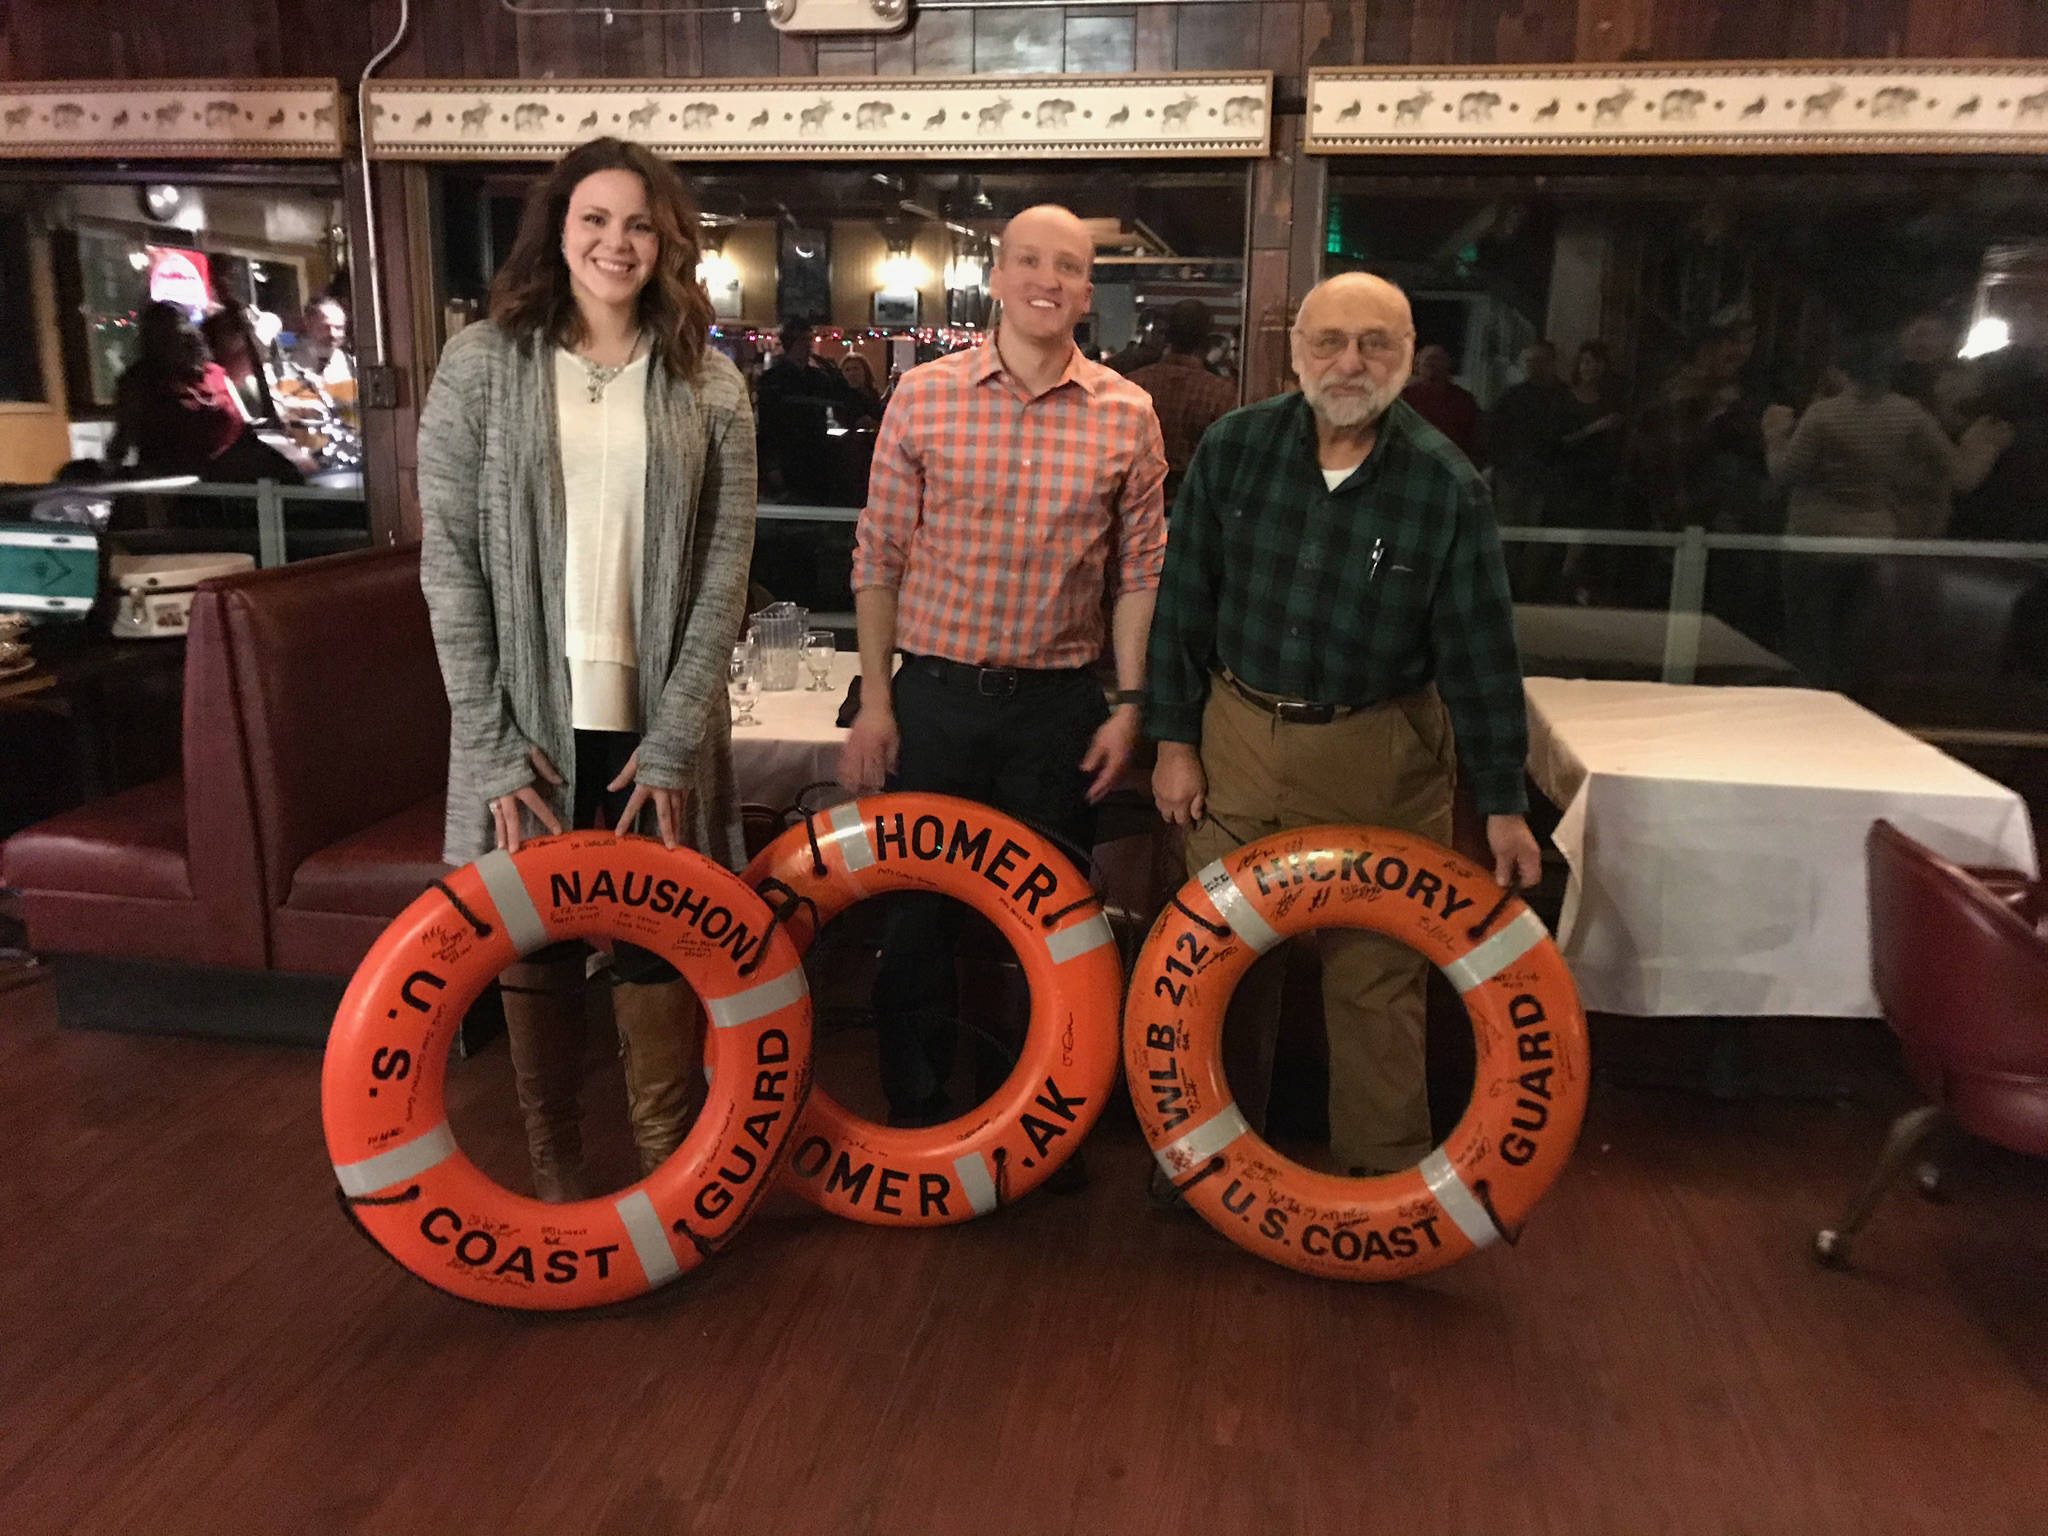 USCG Naushon and Hickory commanding officers present ship’s rescue rings for display in the Homer Elks Lodge dining room at a holiday party held for local Coast Guard on Dec. 14, 2017. Pictured left to right are Naushon Commander Lt. Lauren L. Milici, Hickory Commander Lt. Brent Mellen and Don Cotogno, Homer Elks Board Chairman. (Photo provided)